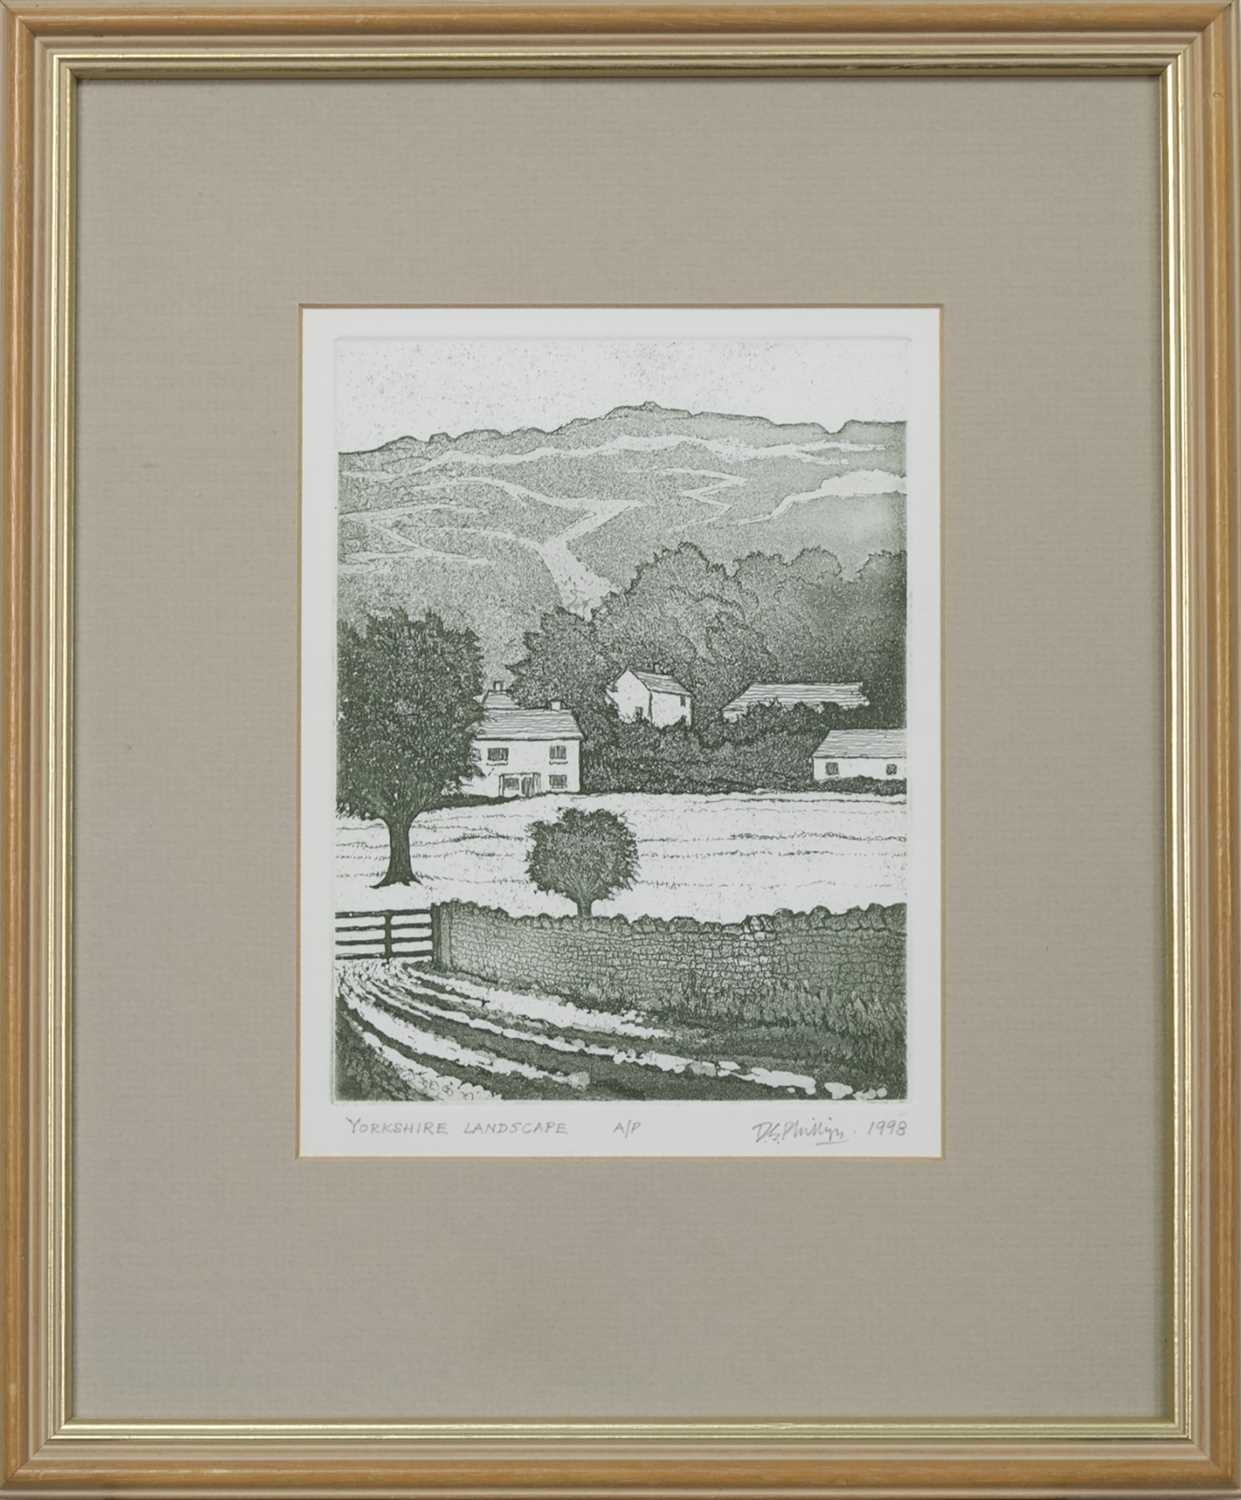 Lot 528 - YORKSHIRE LANDSCAPE, AN ETCHING BY DAVID PHILLIPS